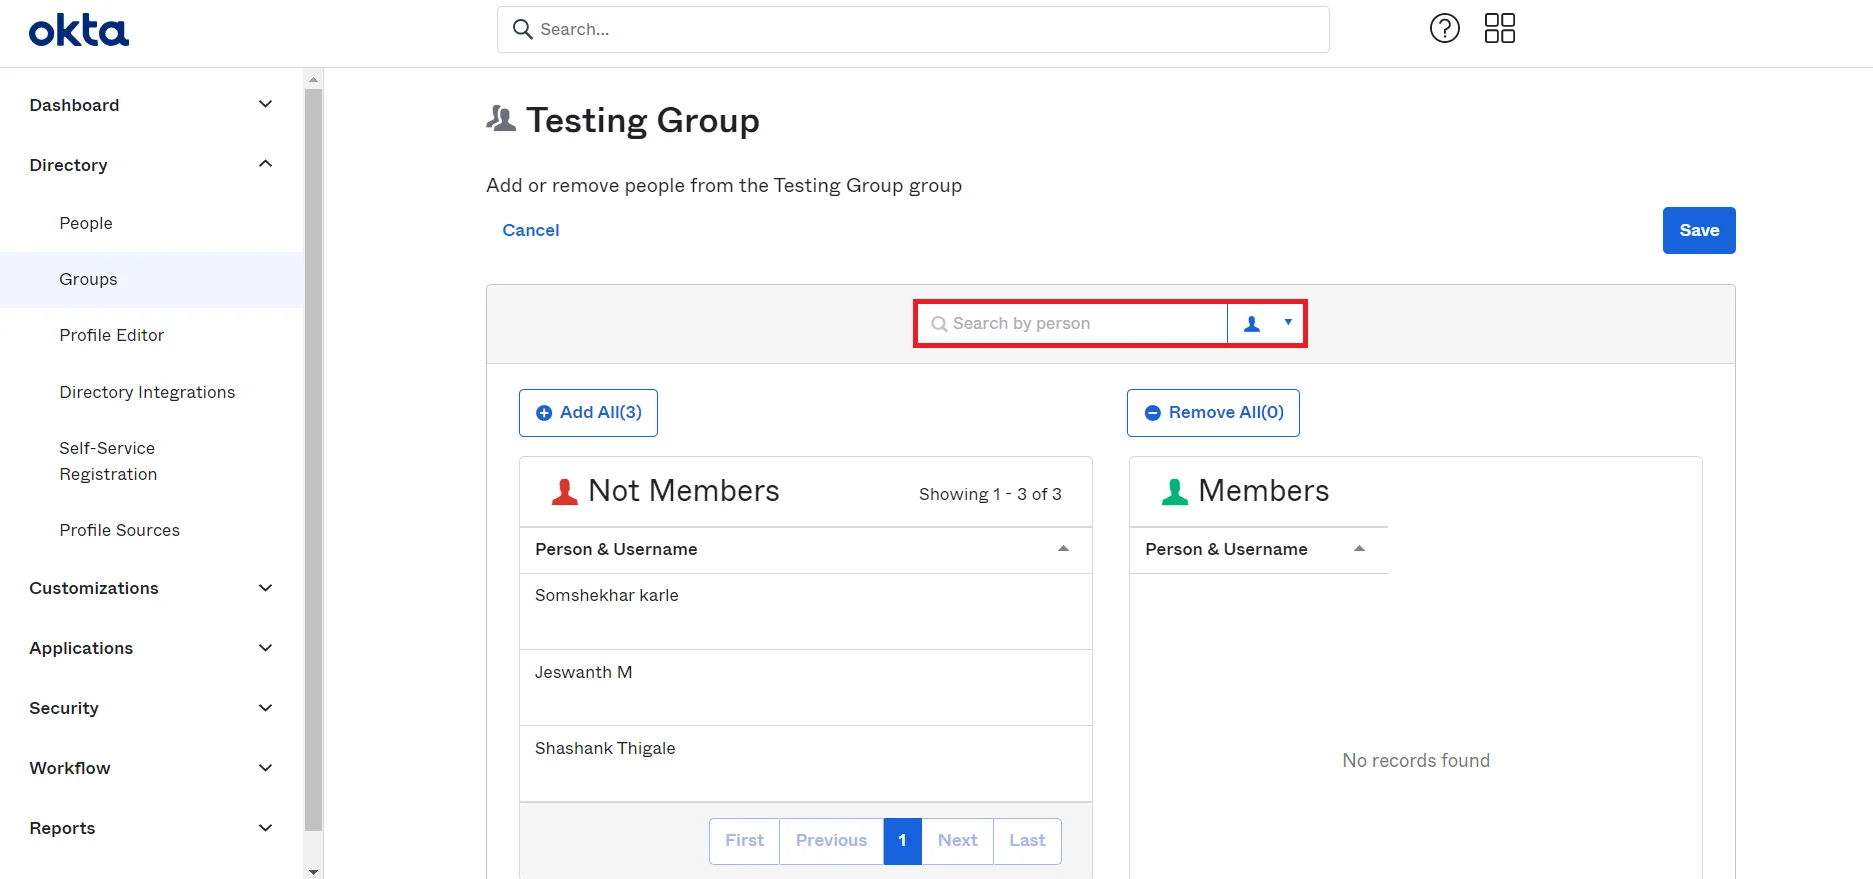 Okta Groups and Roles Assign